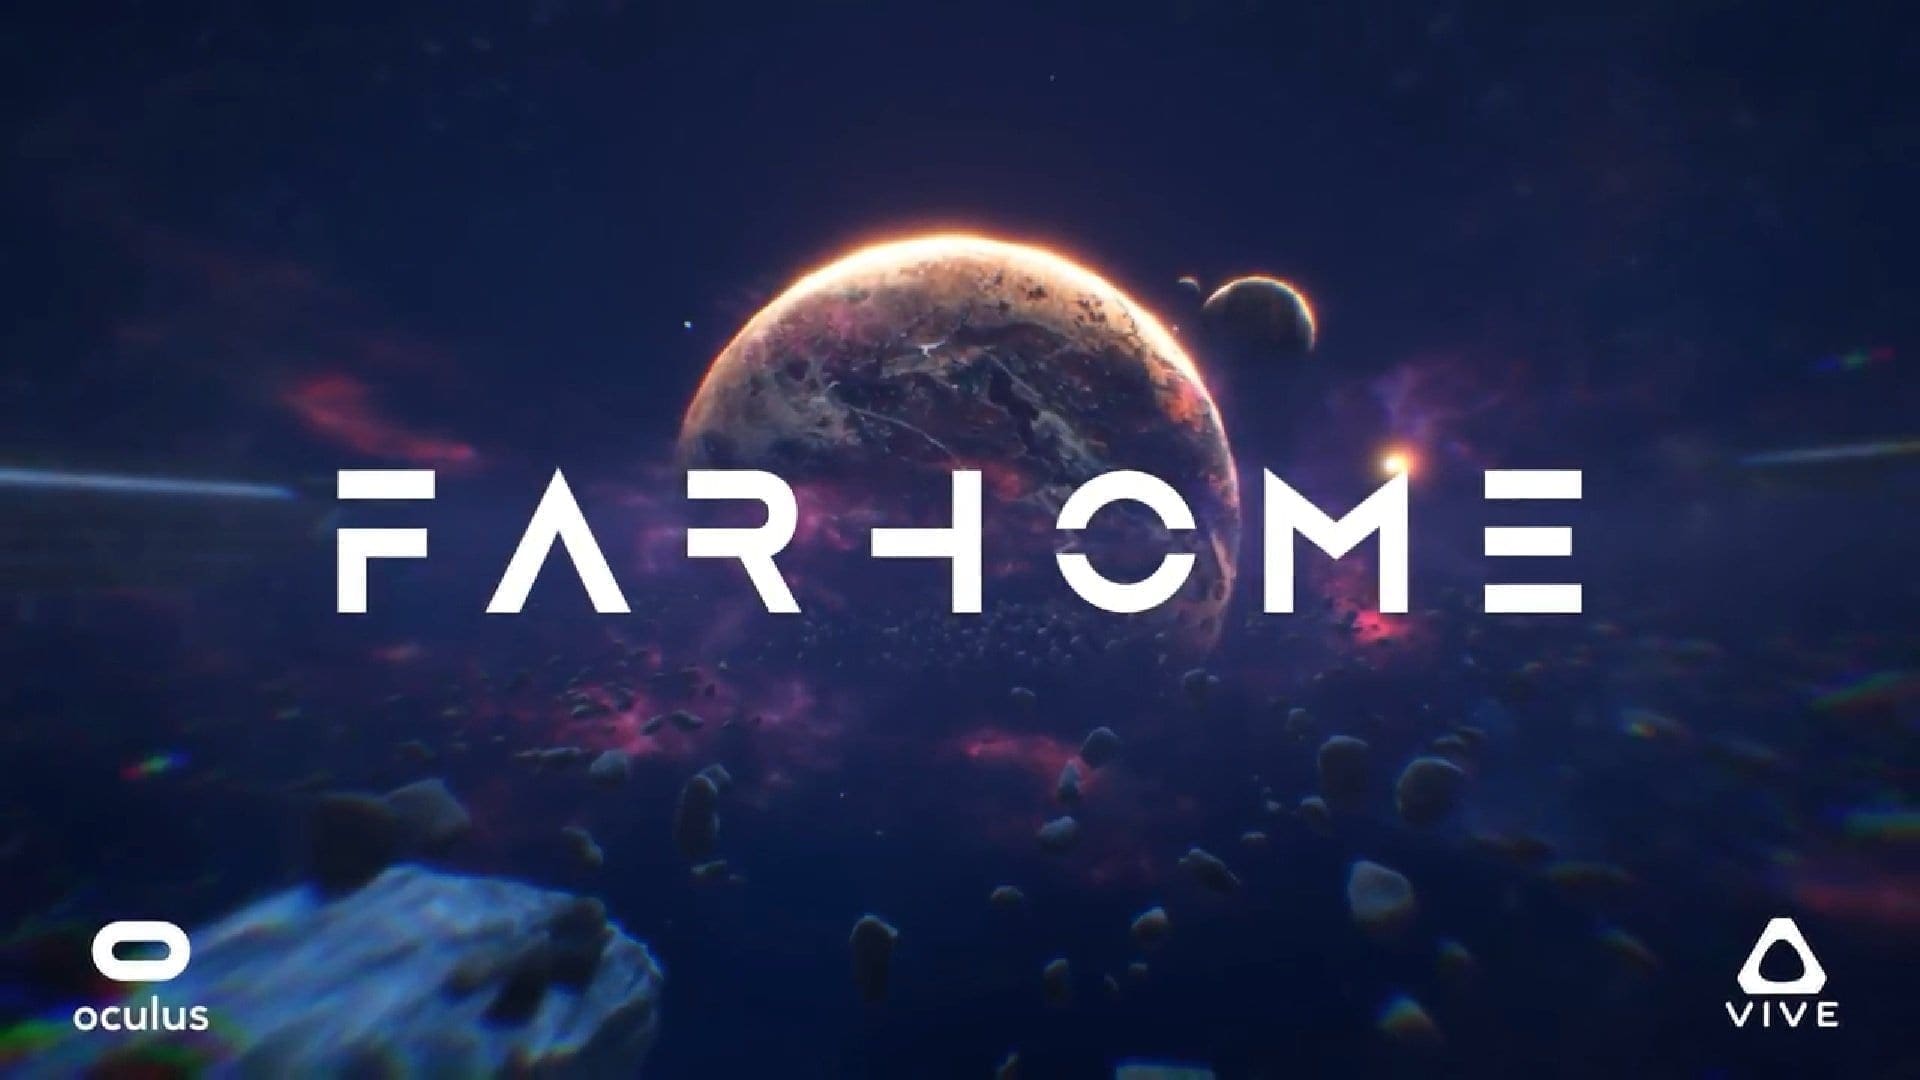 Epic vr. FARHOME. Please forgive me игра Steam. We are one VR.